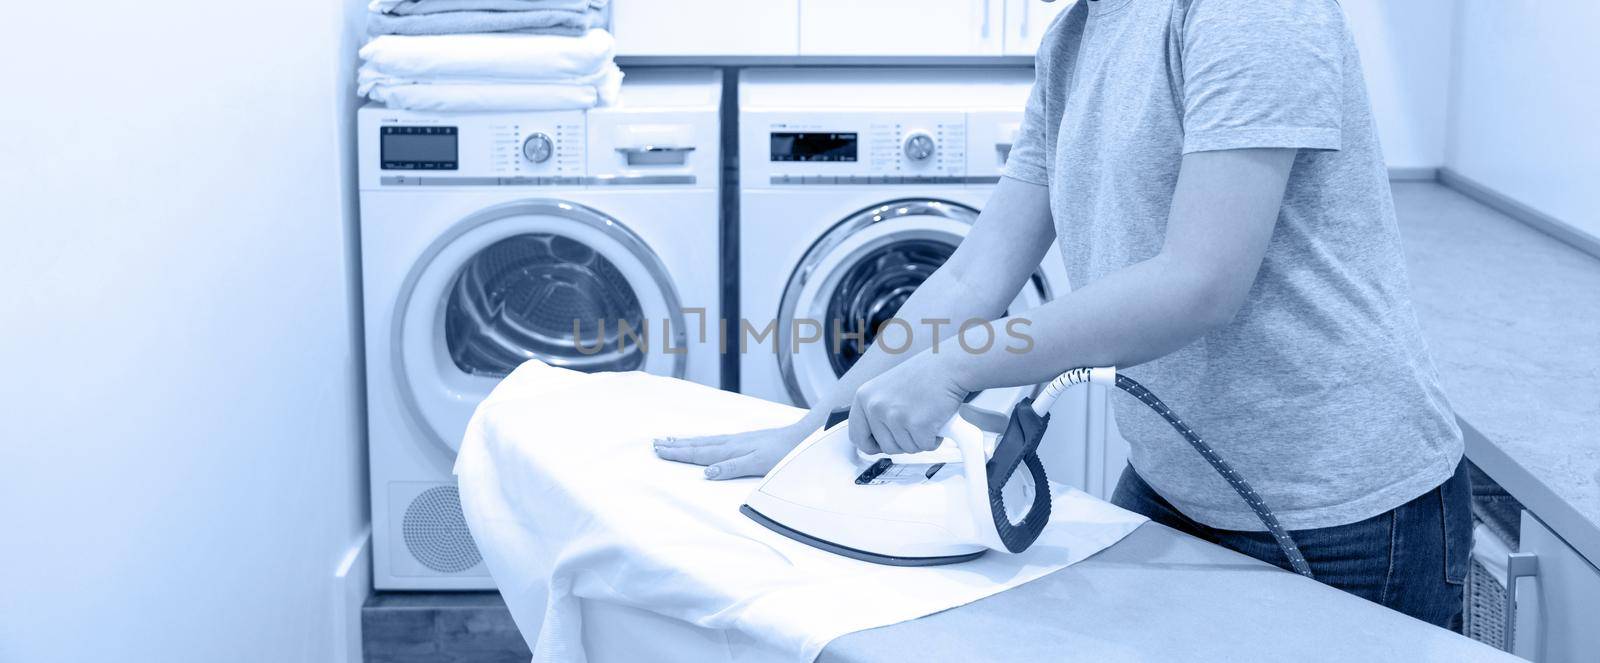 Young Woman ironing white shirt on board in laundry room with washing machine on background by Mariakray